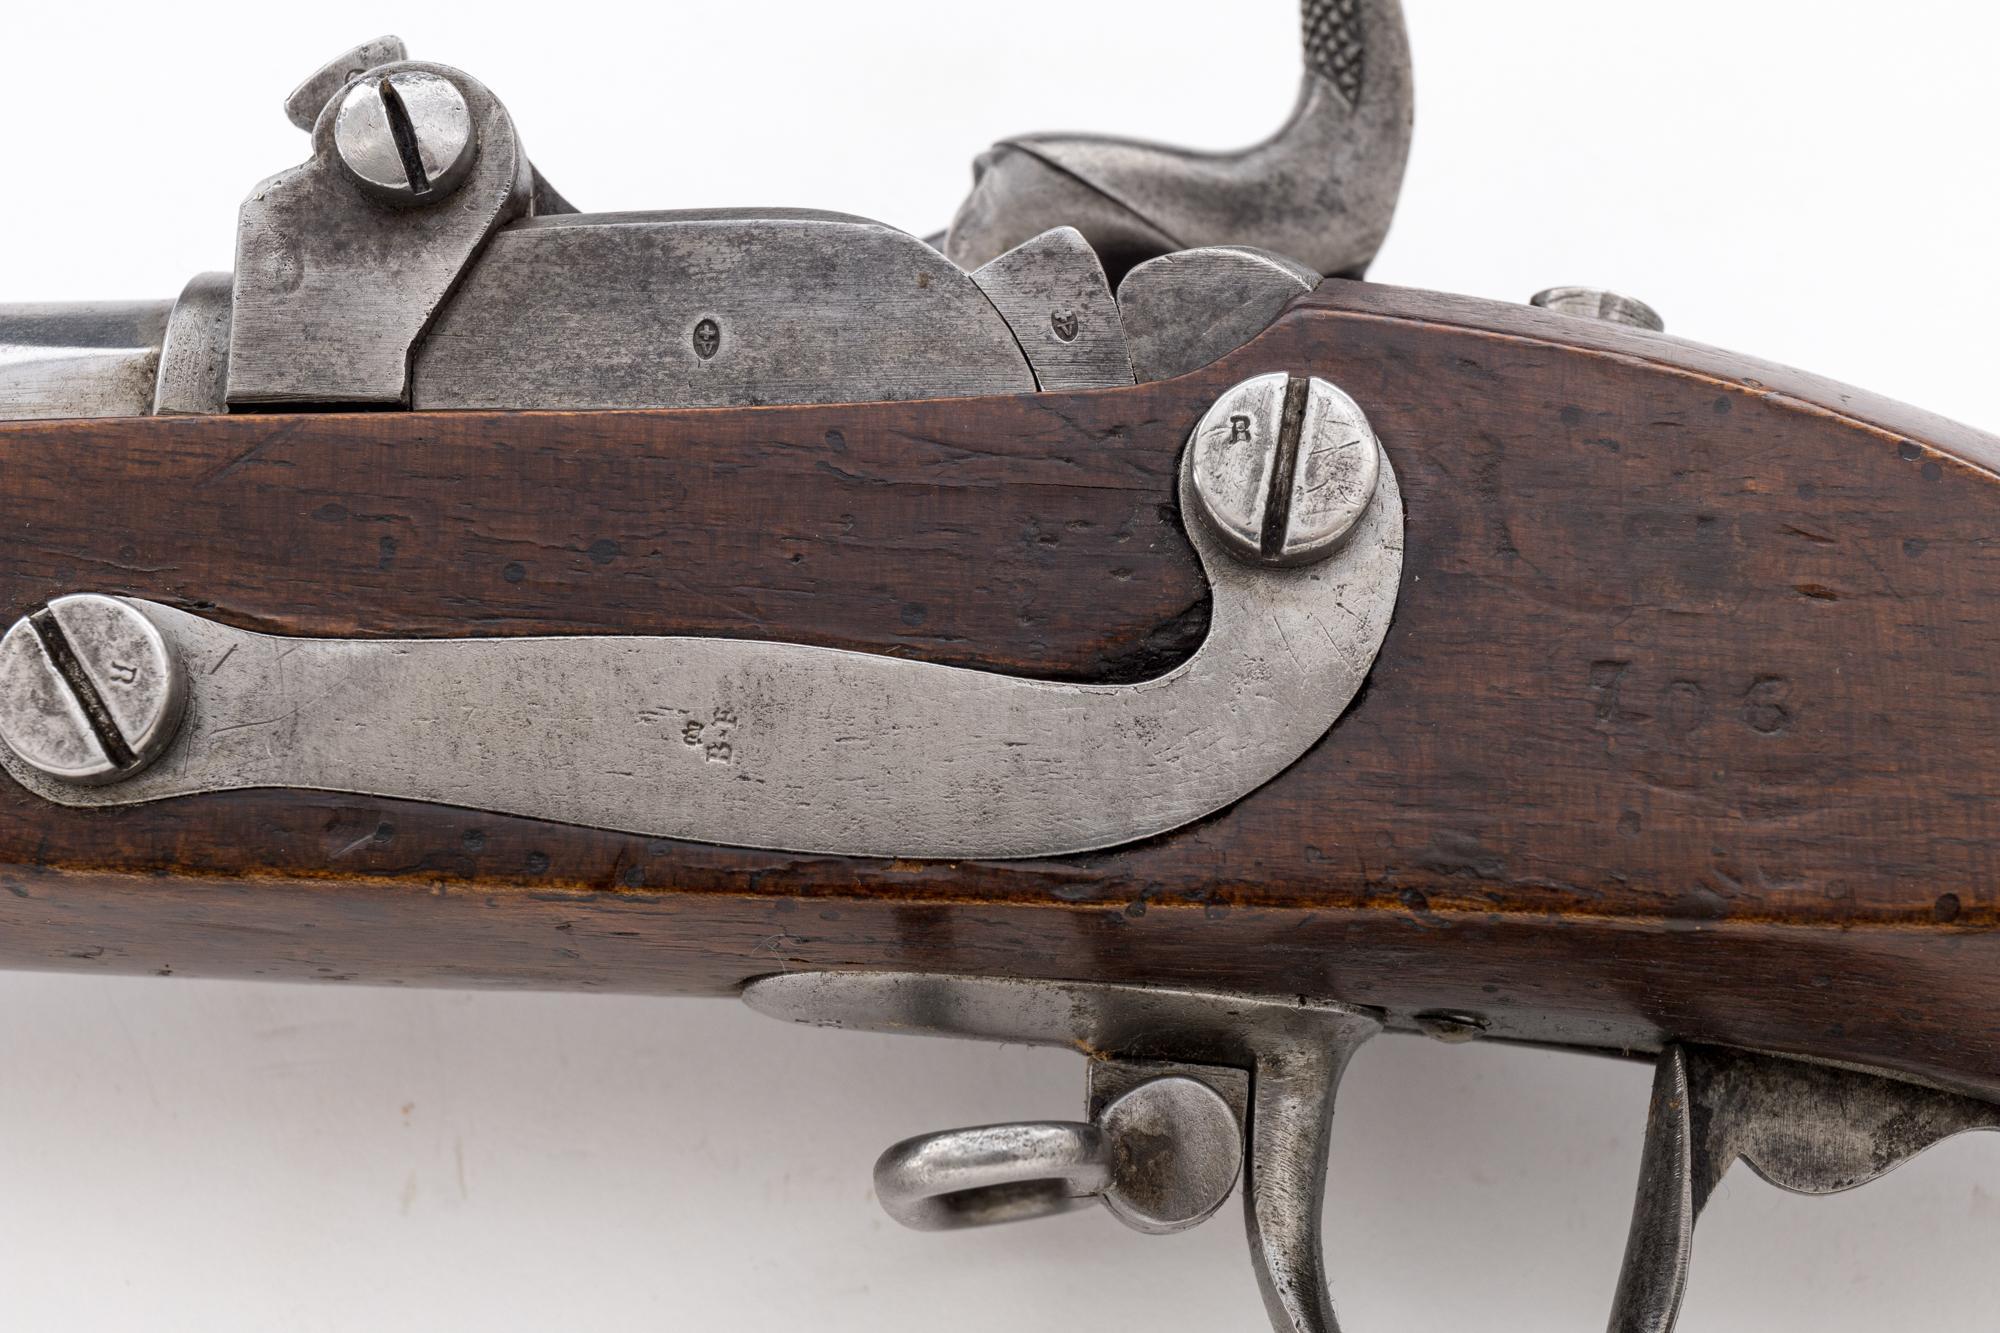 Antique Swiss Model 1842/67 Infantry Rifle, with Milbank-Amsler Metallic Cartridge Alteration